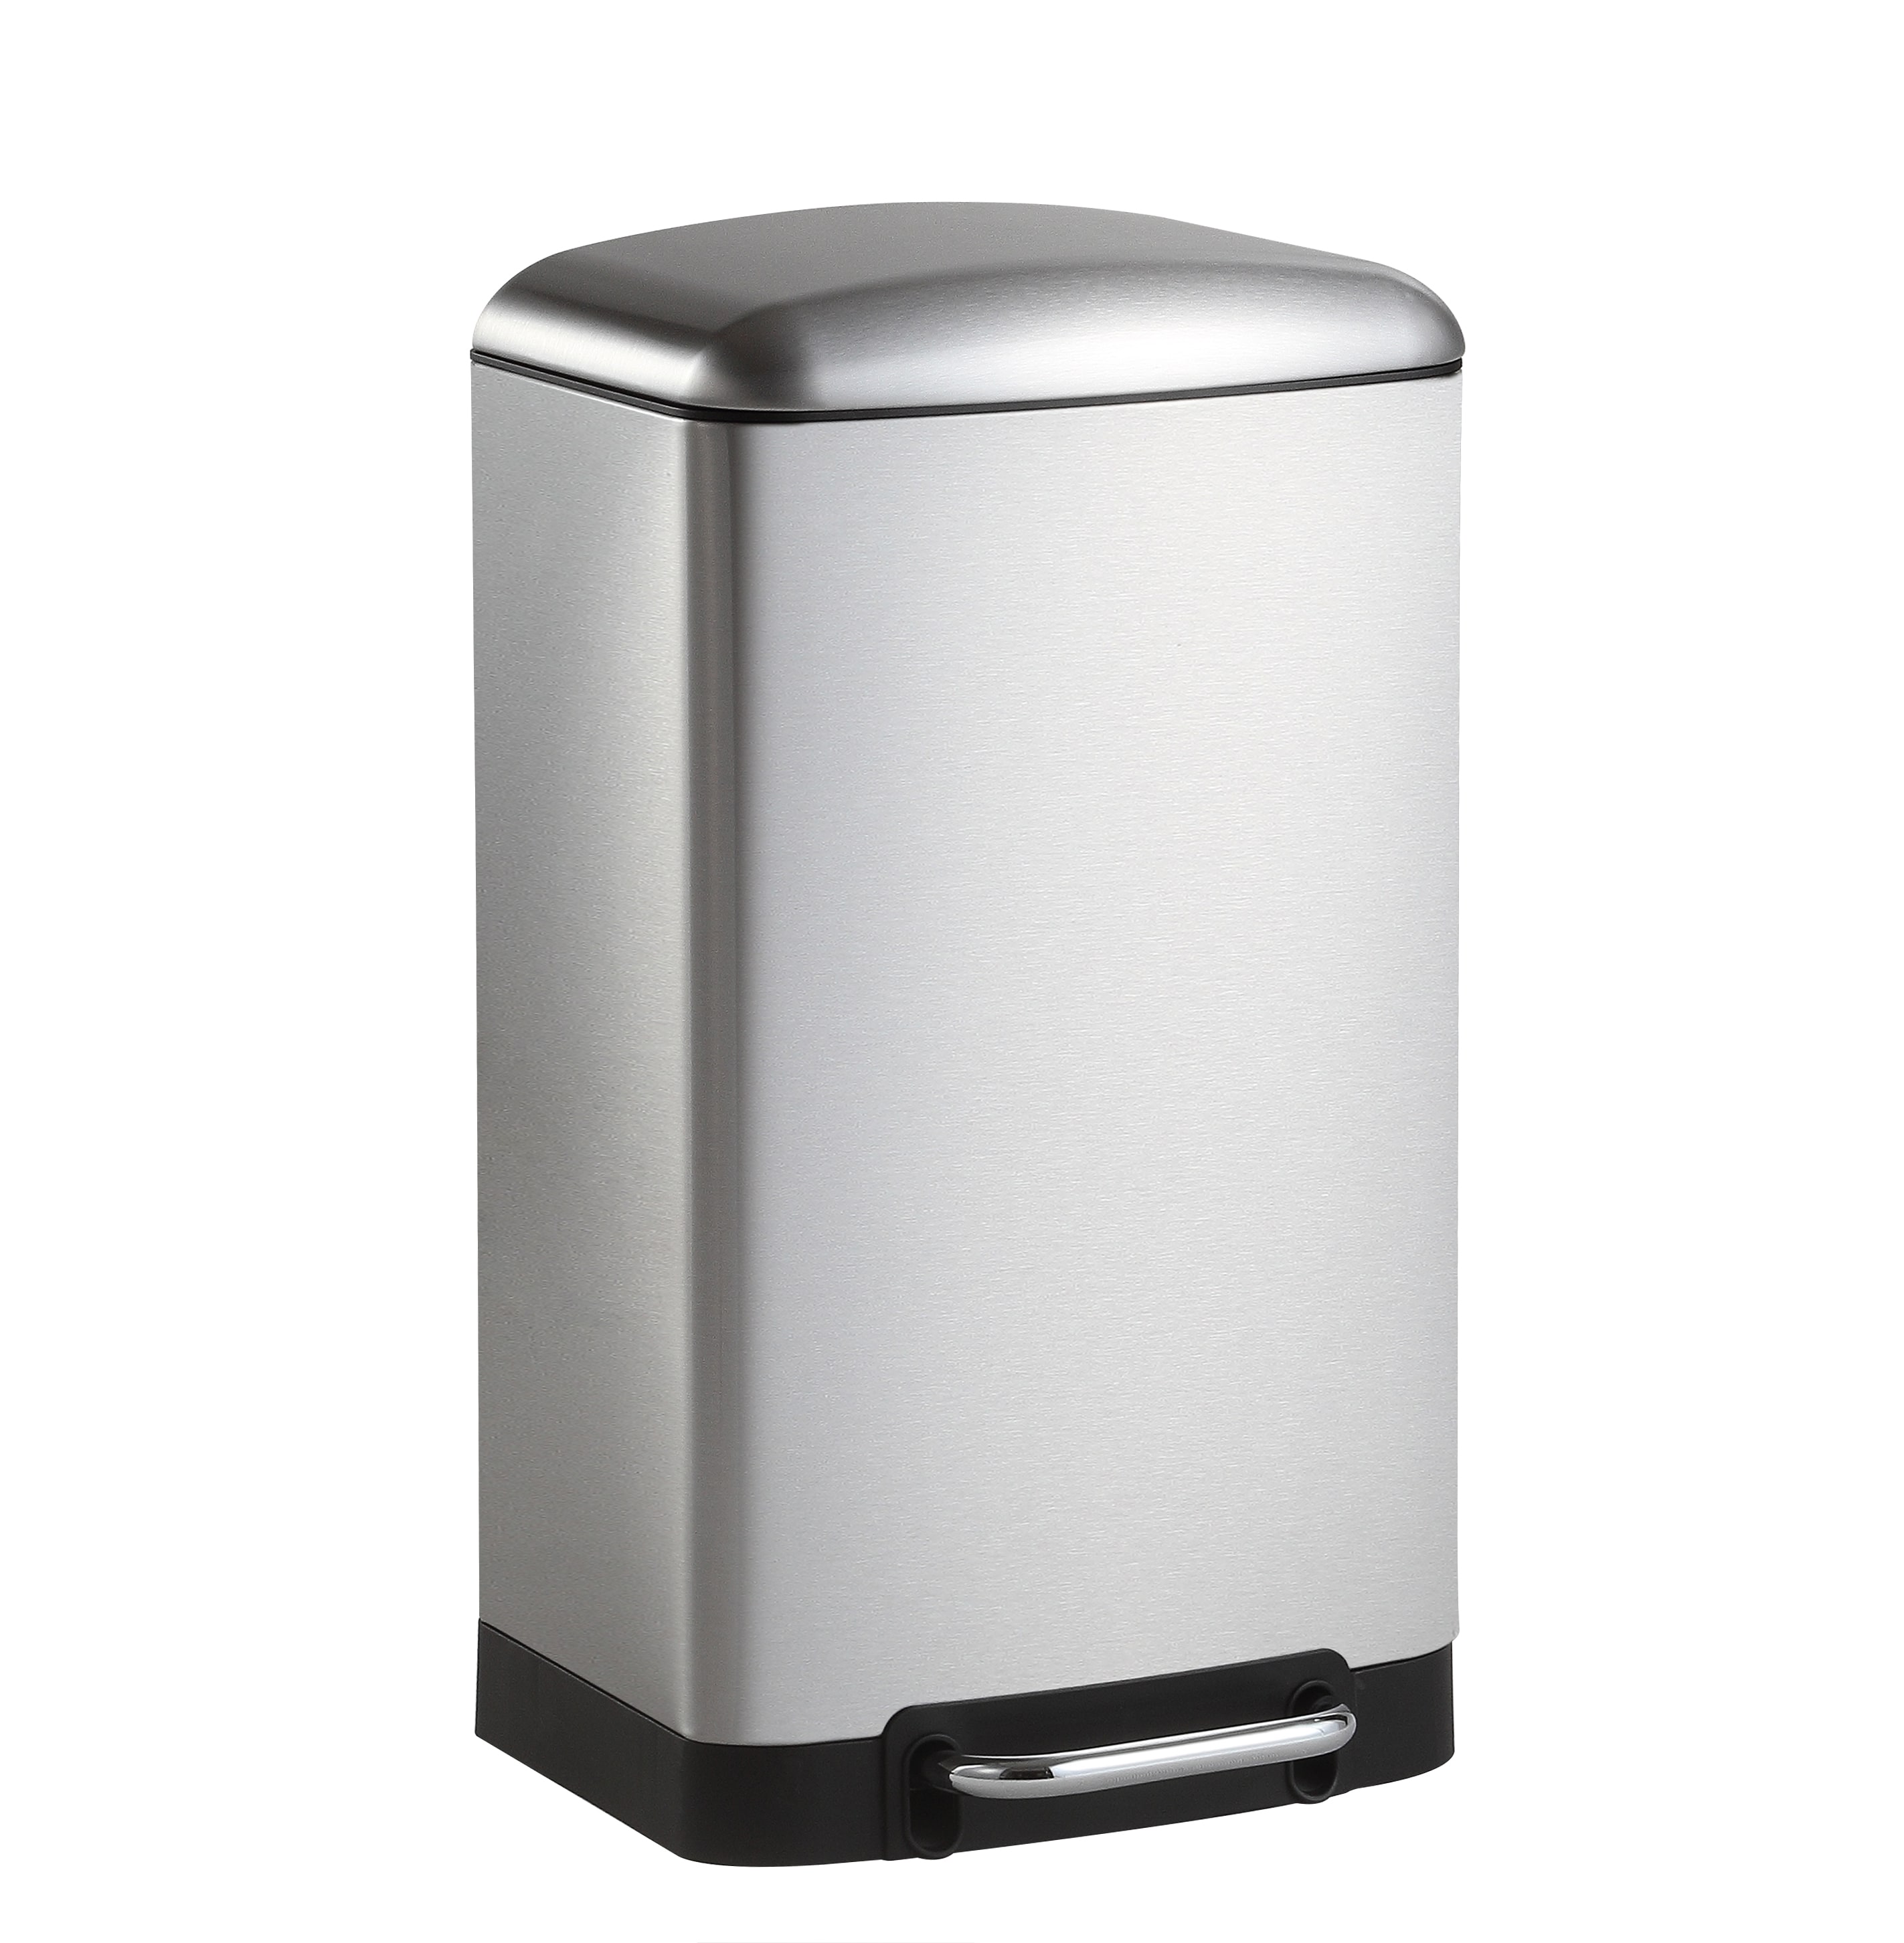 Home Zone Living 18.5 gal Tall Kitchen Garbage Can, Stainless Steel 